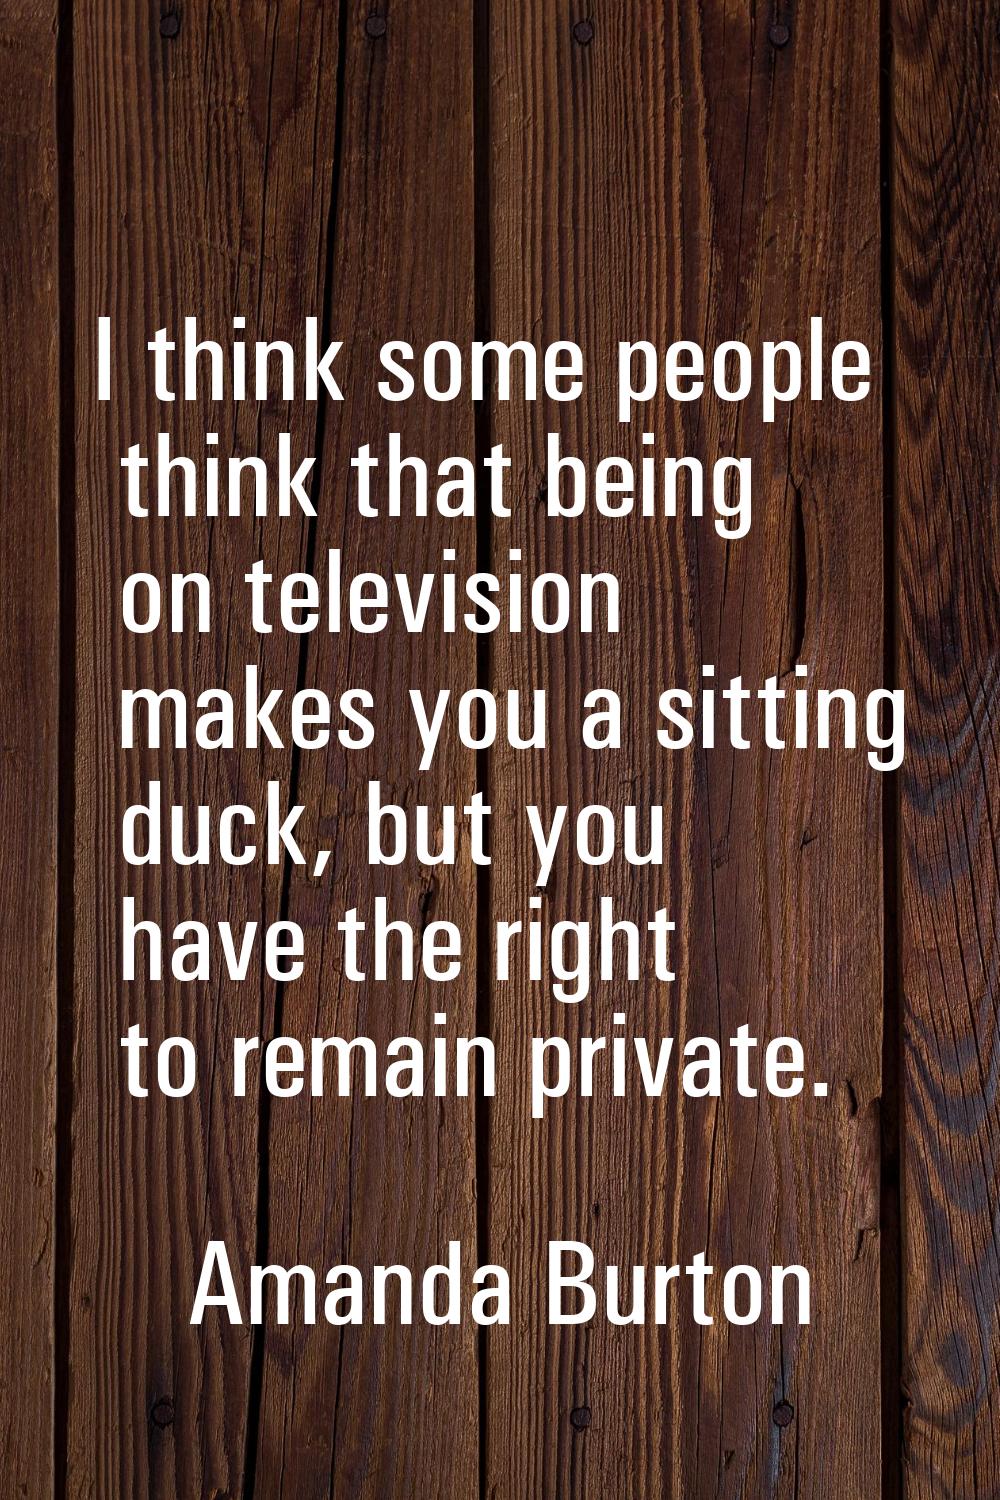 I think some people think that being on television makes you a sitting duck, but you have the right